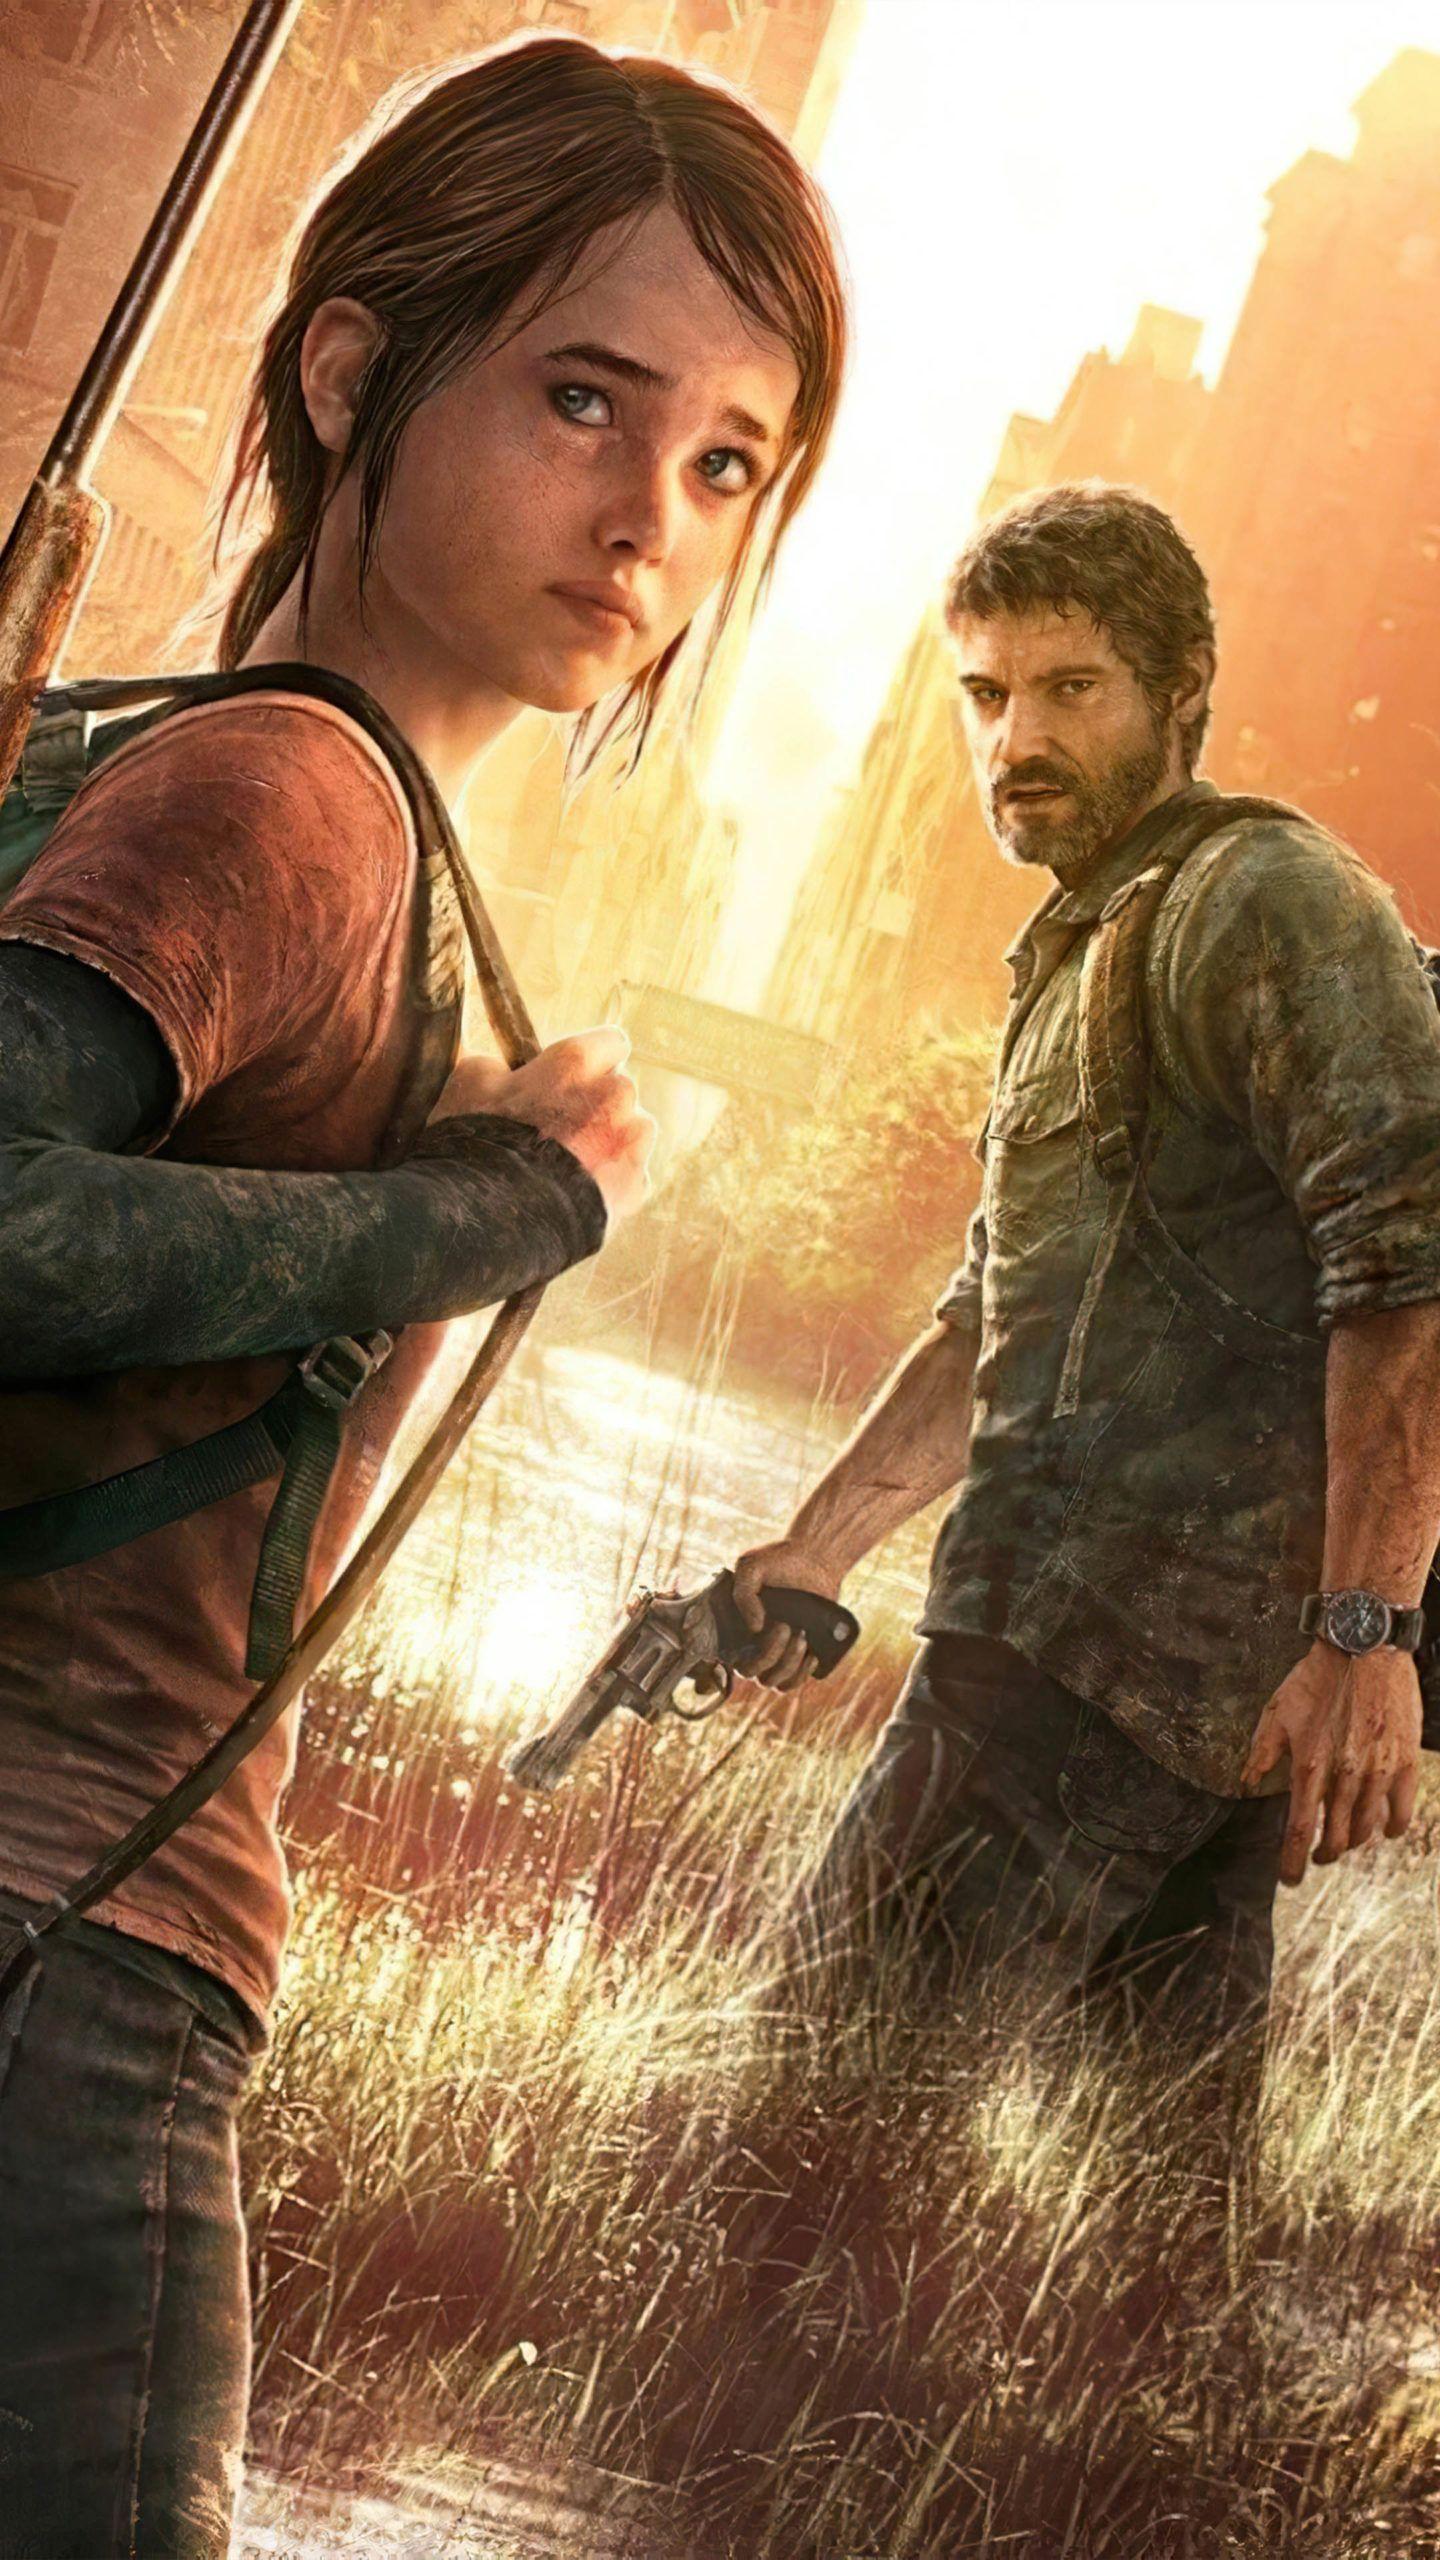 prompthunt: last of us 4k wallpaper with Ellie and Joel fighting against a  clicker together. Illustrated style with bright vibrant colours